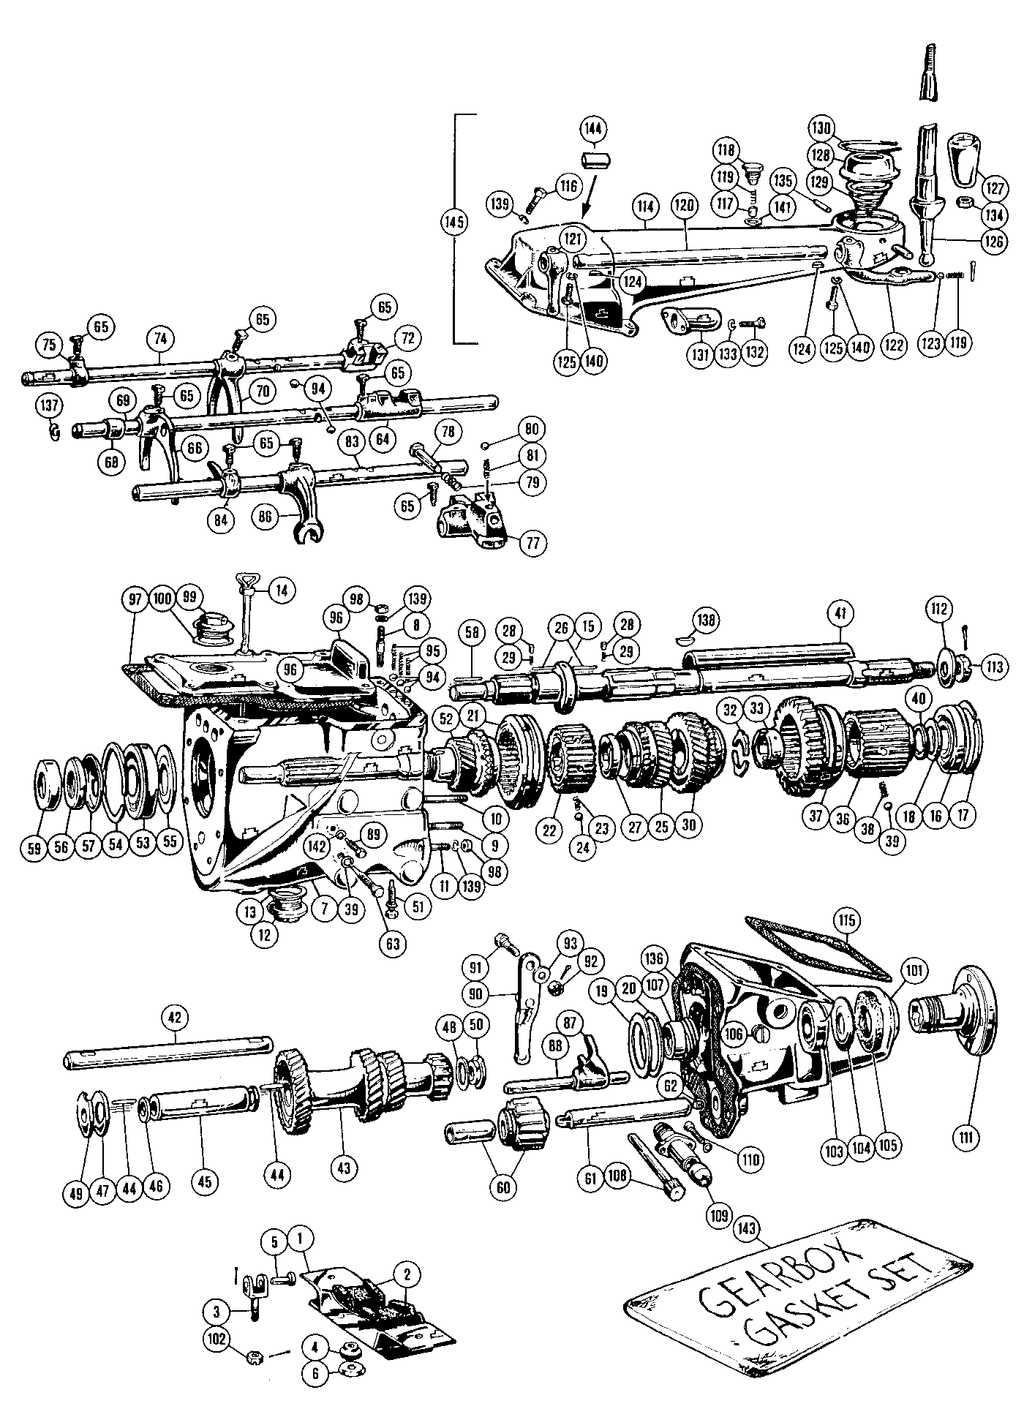 MGTD-TF 1949-1955 - Gearboxes & gearbox parts - Gearbox - 1